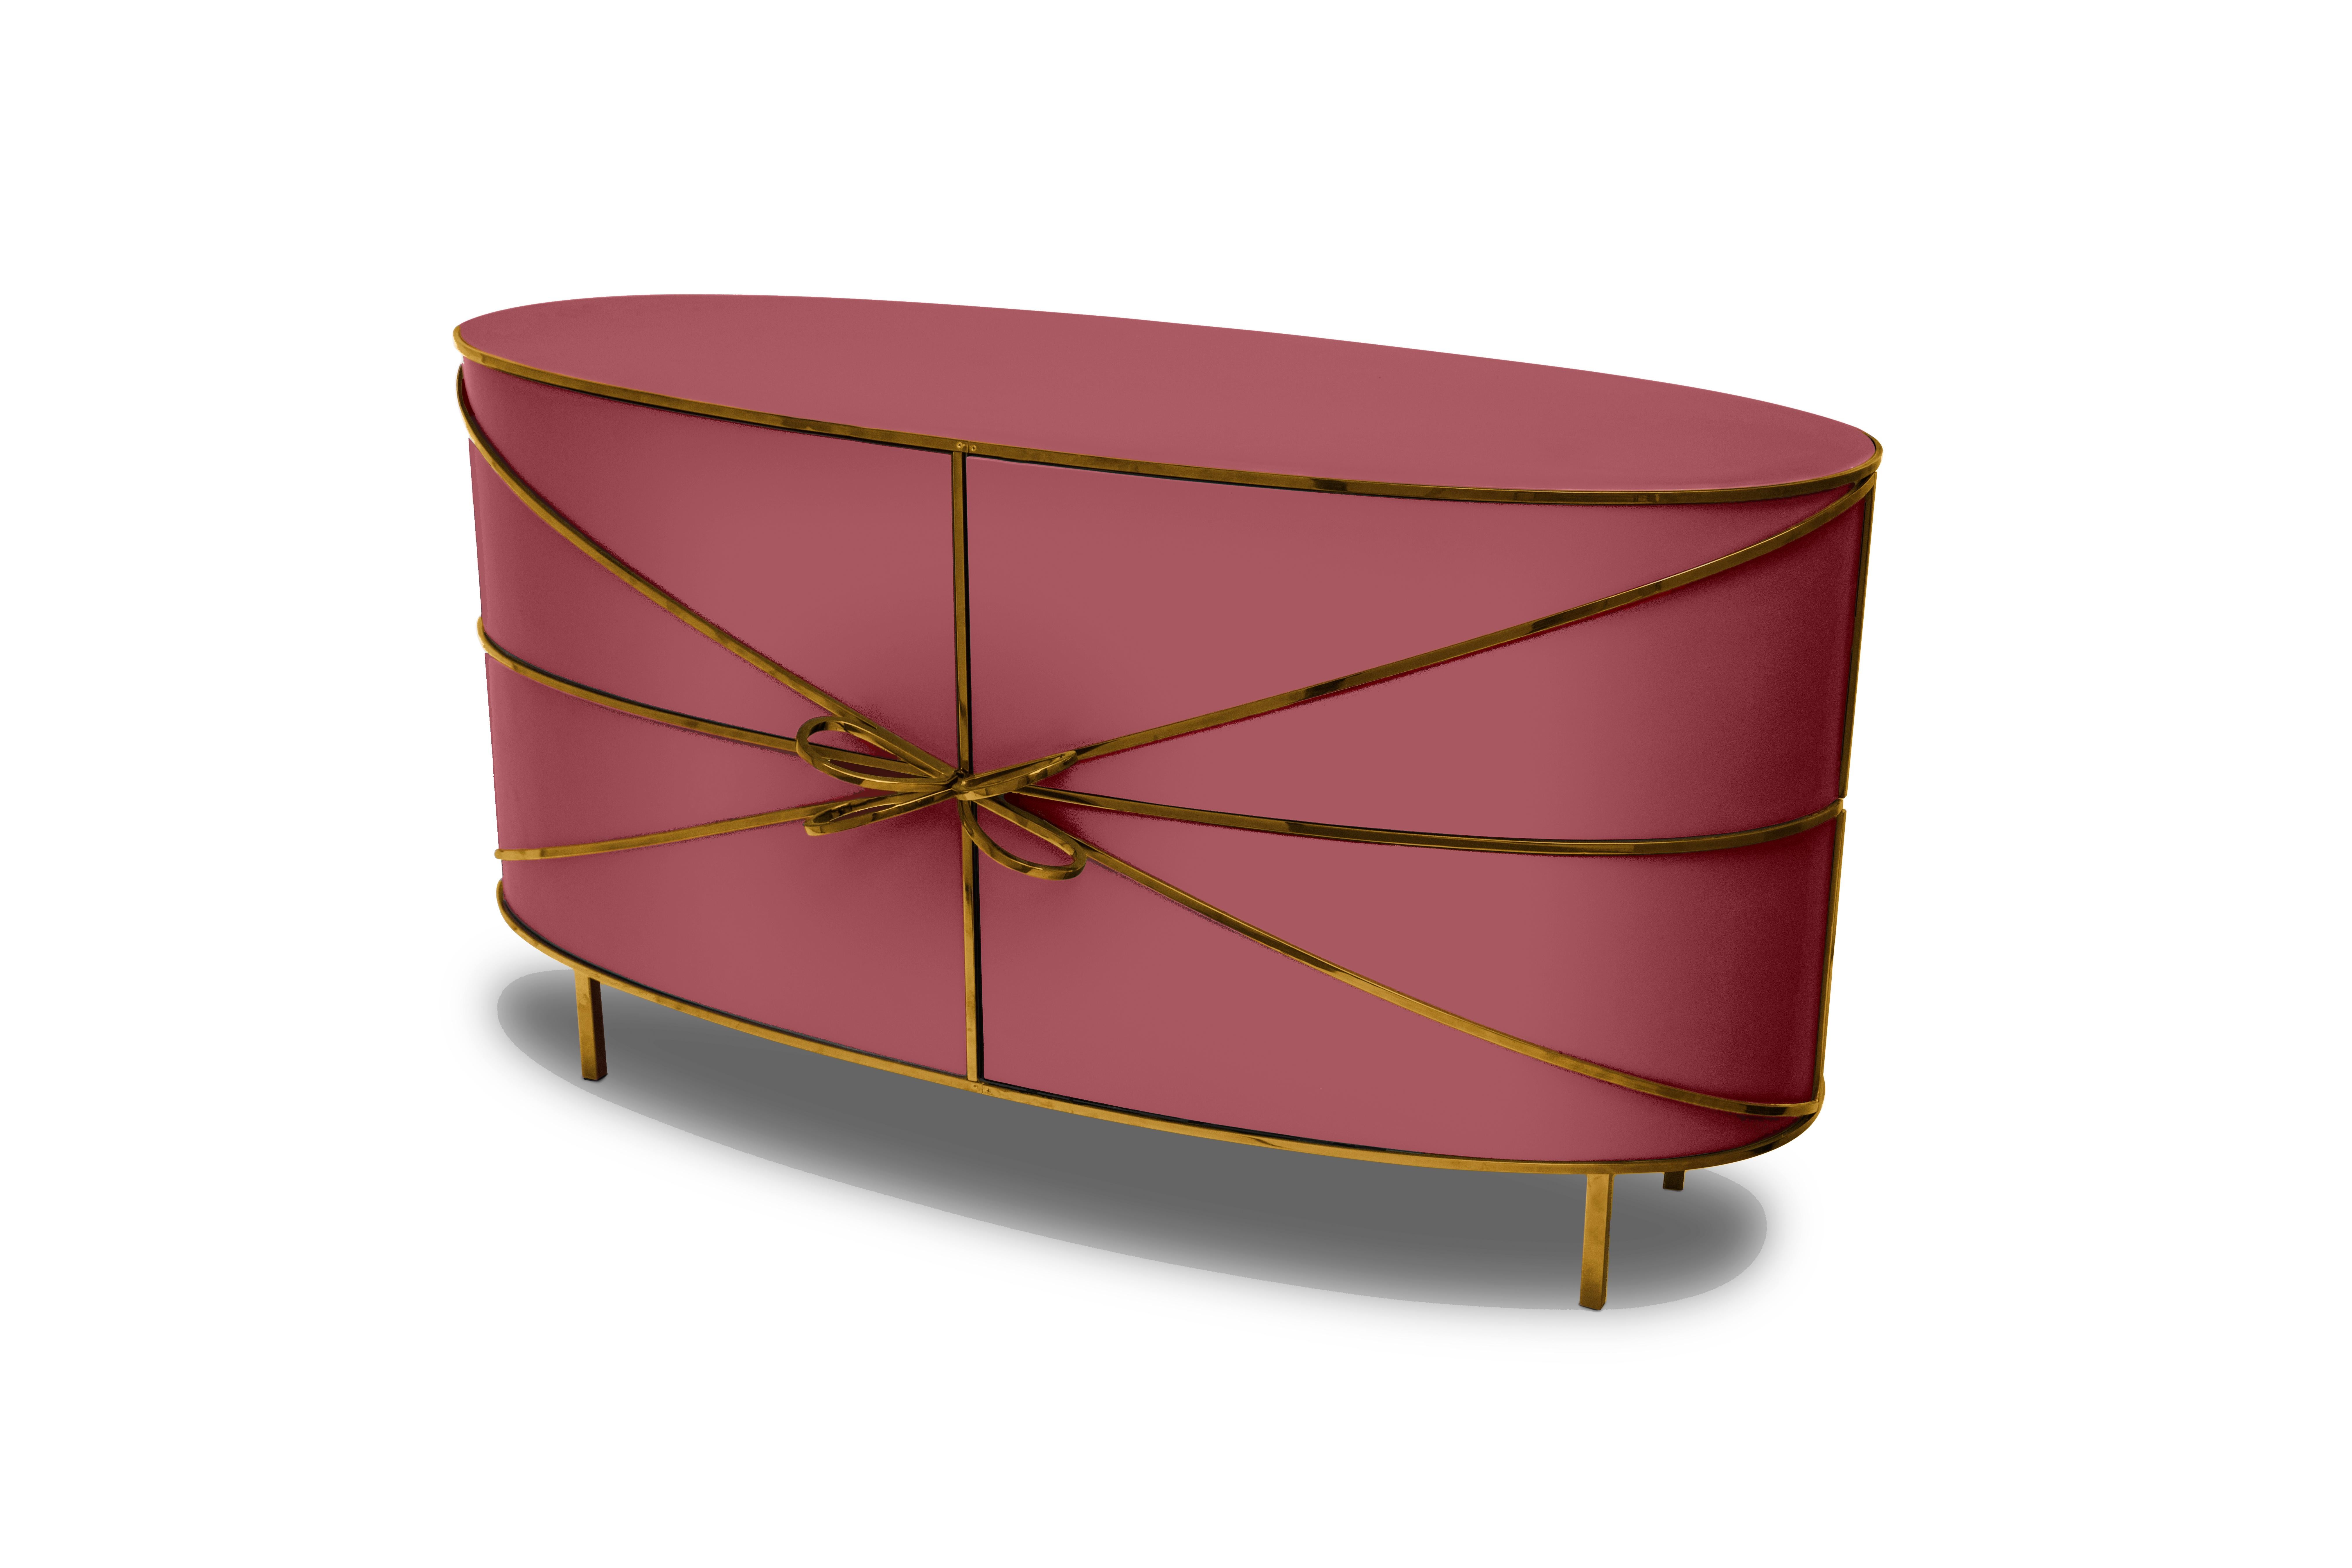 88 Secrets Rose Pink Sideboard with Gold Trims by Nika Zupanc is a beautiful pink cabinet in sensuous, feminine lines with luxurious gold metal trims. A statement piece in any interior space!

Nika Zupanc, a strikingly renowned Slovenian designer,